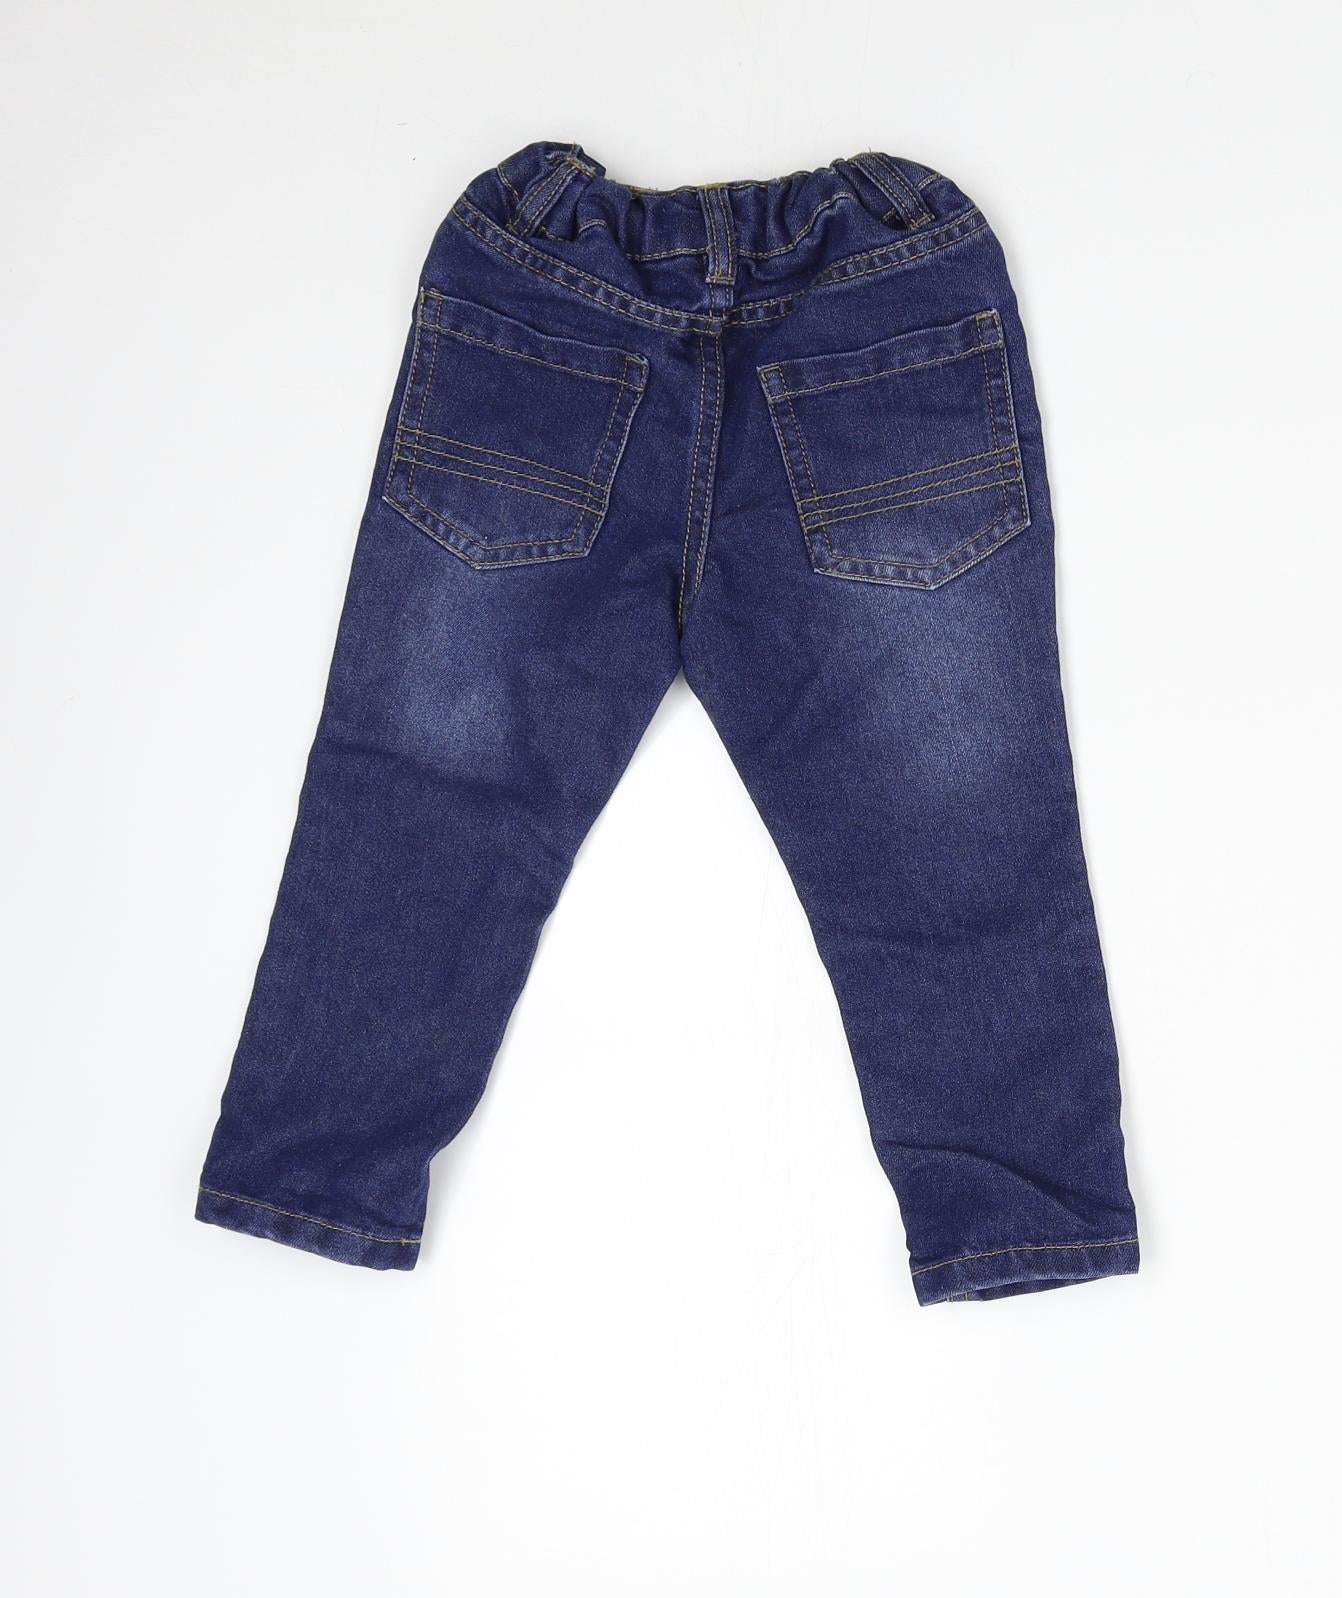 Pep&Co Boys Blue  Denim Straight Jeans Size 2-3 Years